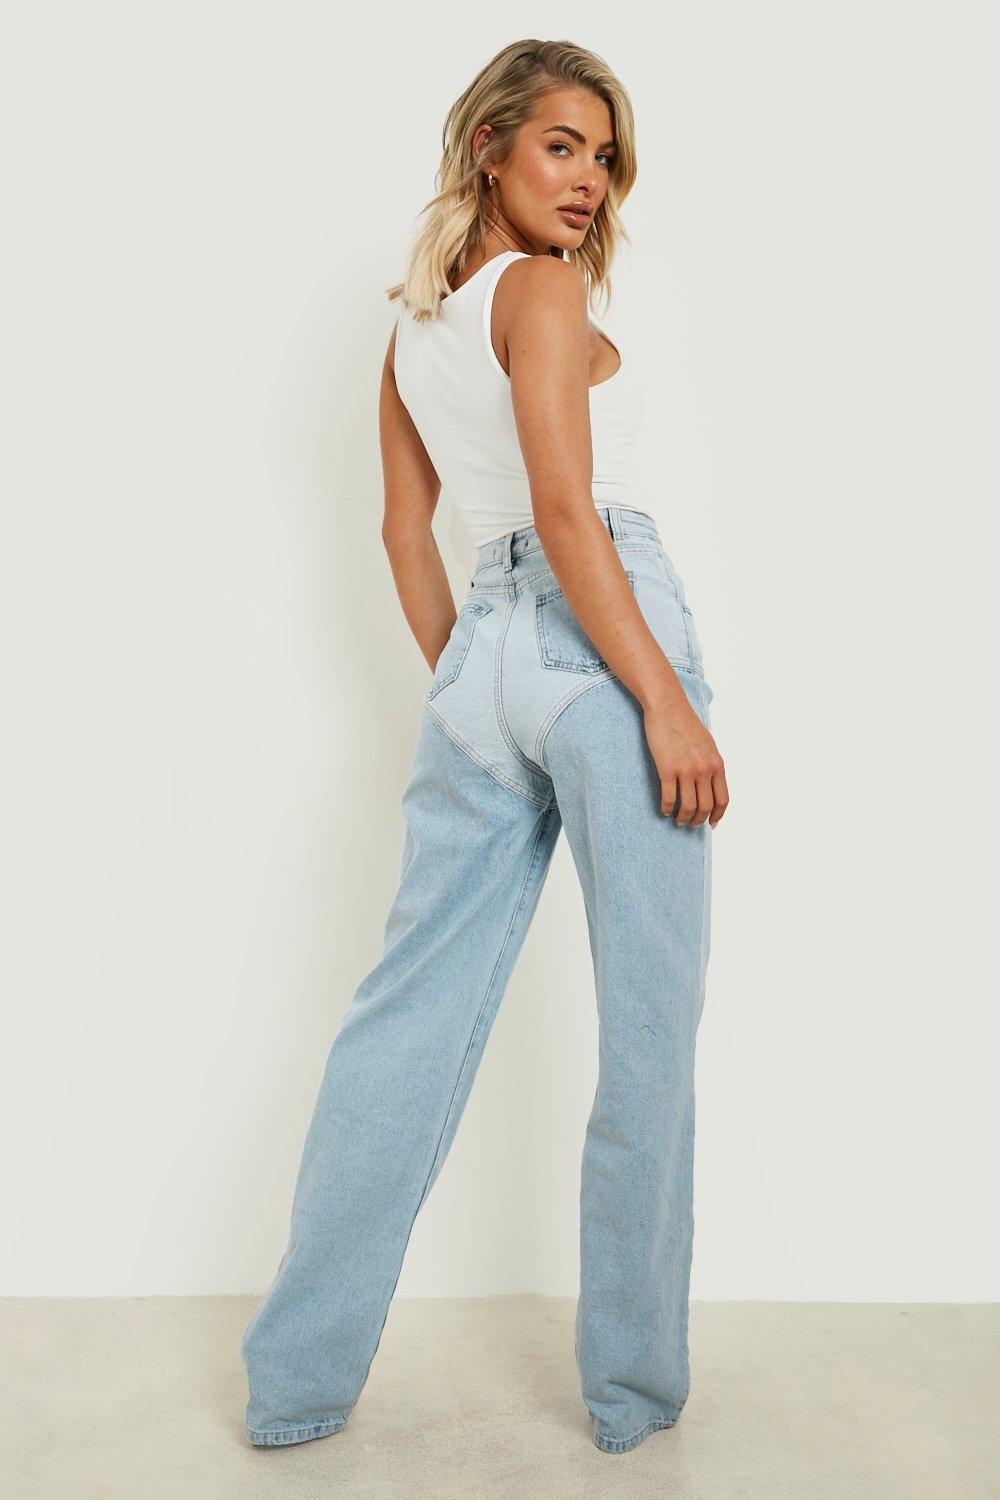 Boohoo Denim High Waist Panelled Straight Fit Jeans in Light Wash Blue Womens Jeans Boohoo Jeans 